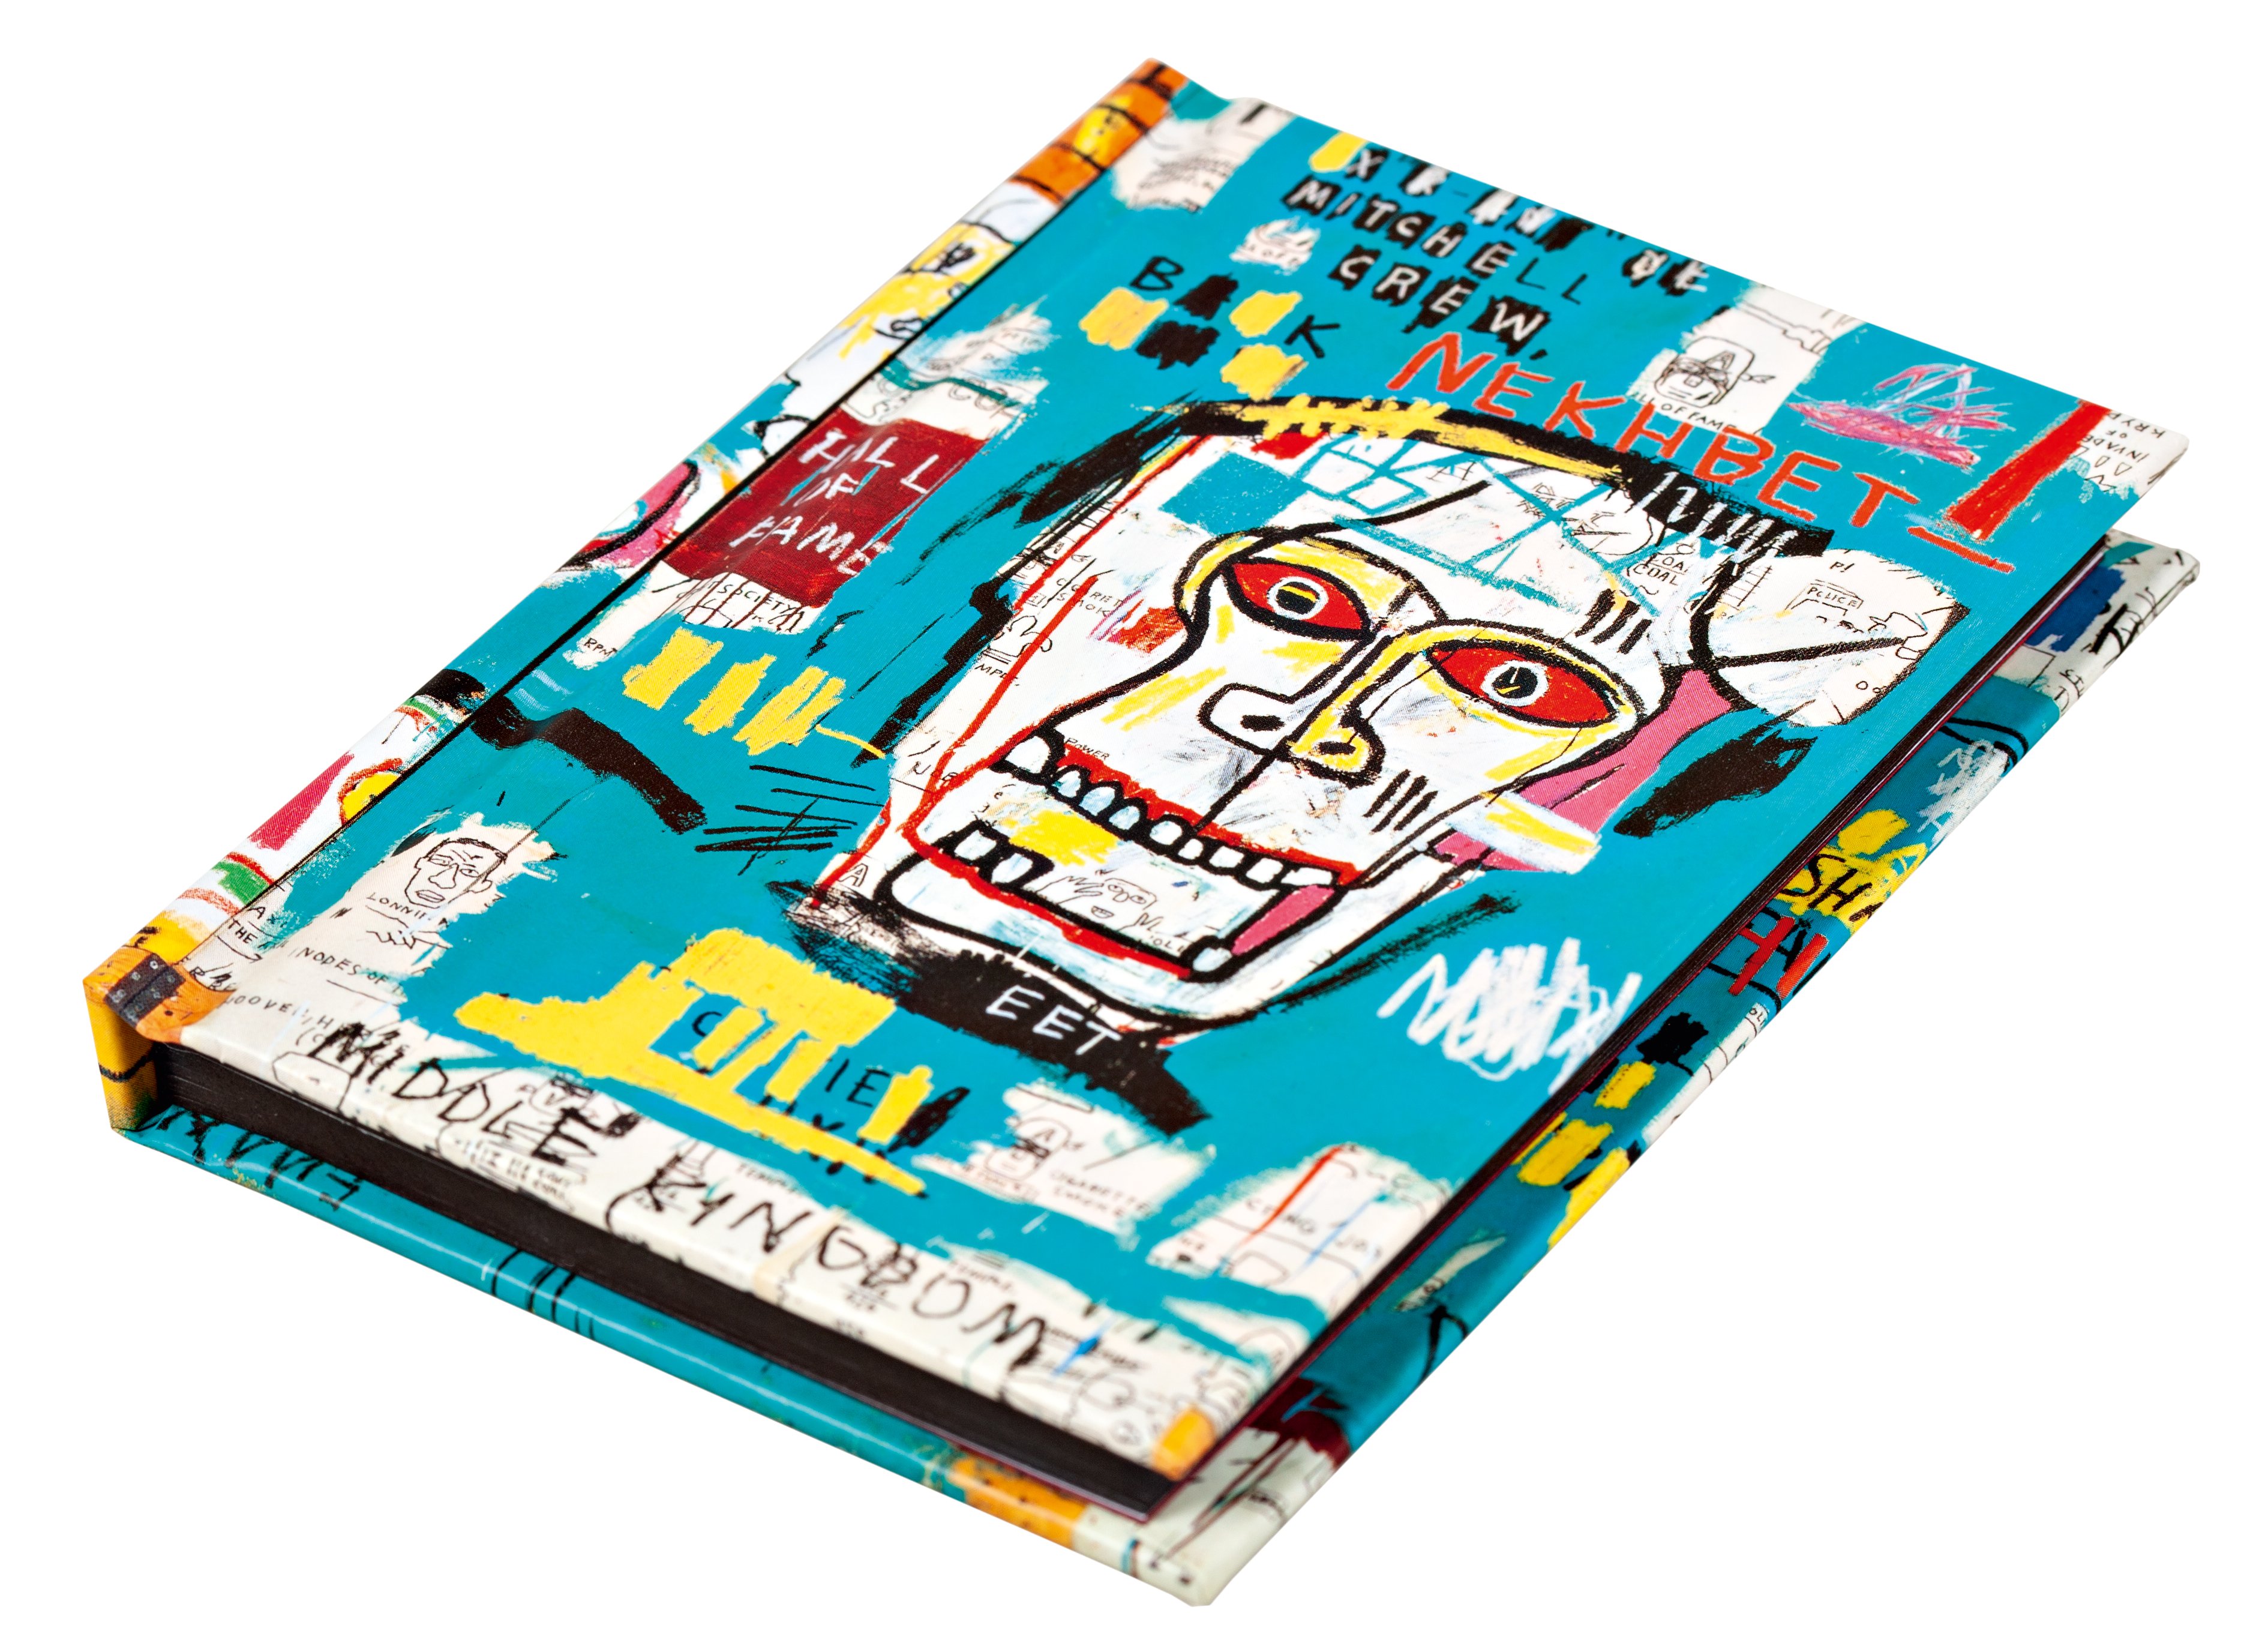 Graffiti artwork 'Skulls (Mitchell Crew)' by Jean-Michel Basquiat, to notebook cover, by teNeues stationery.